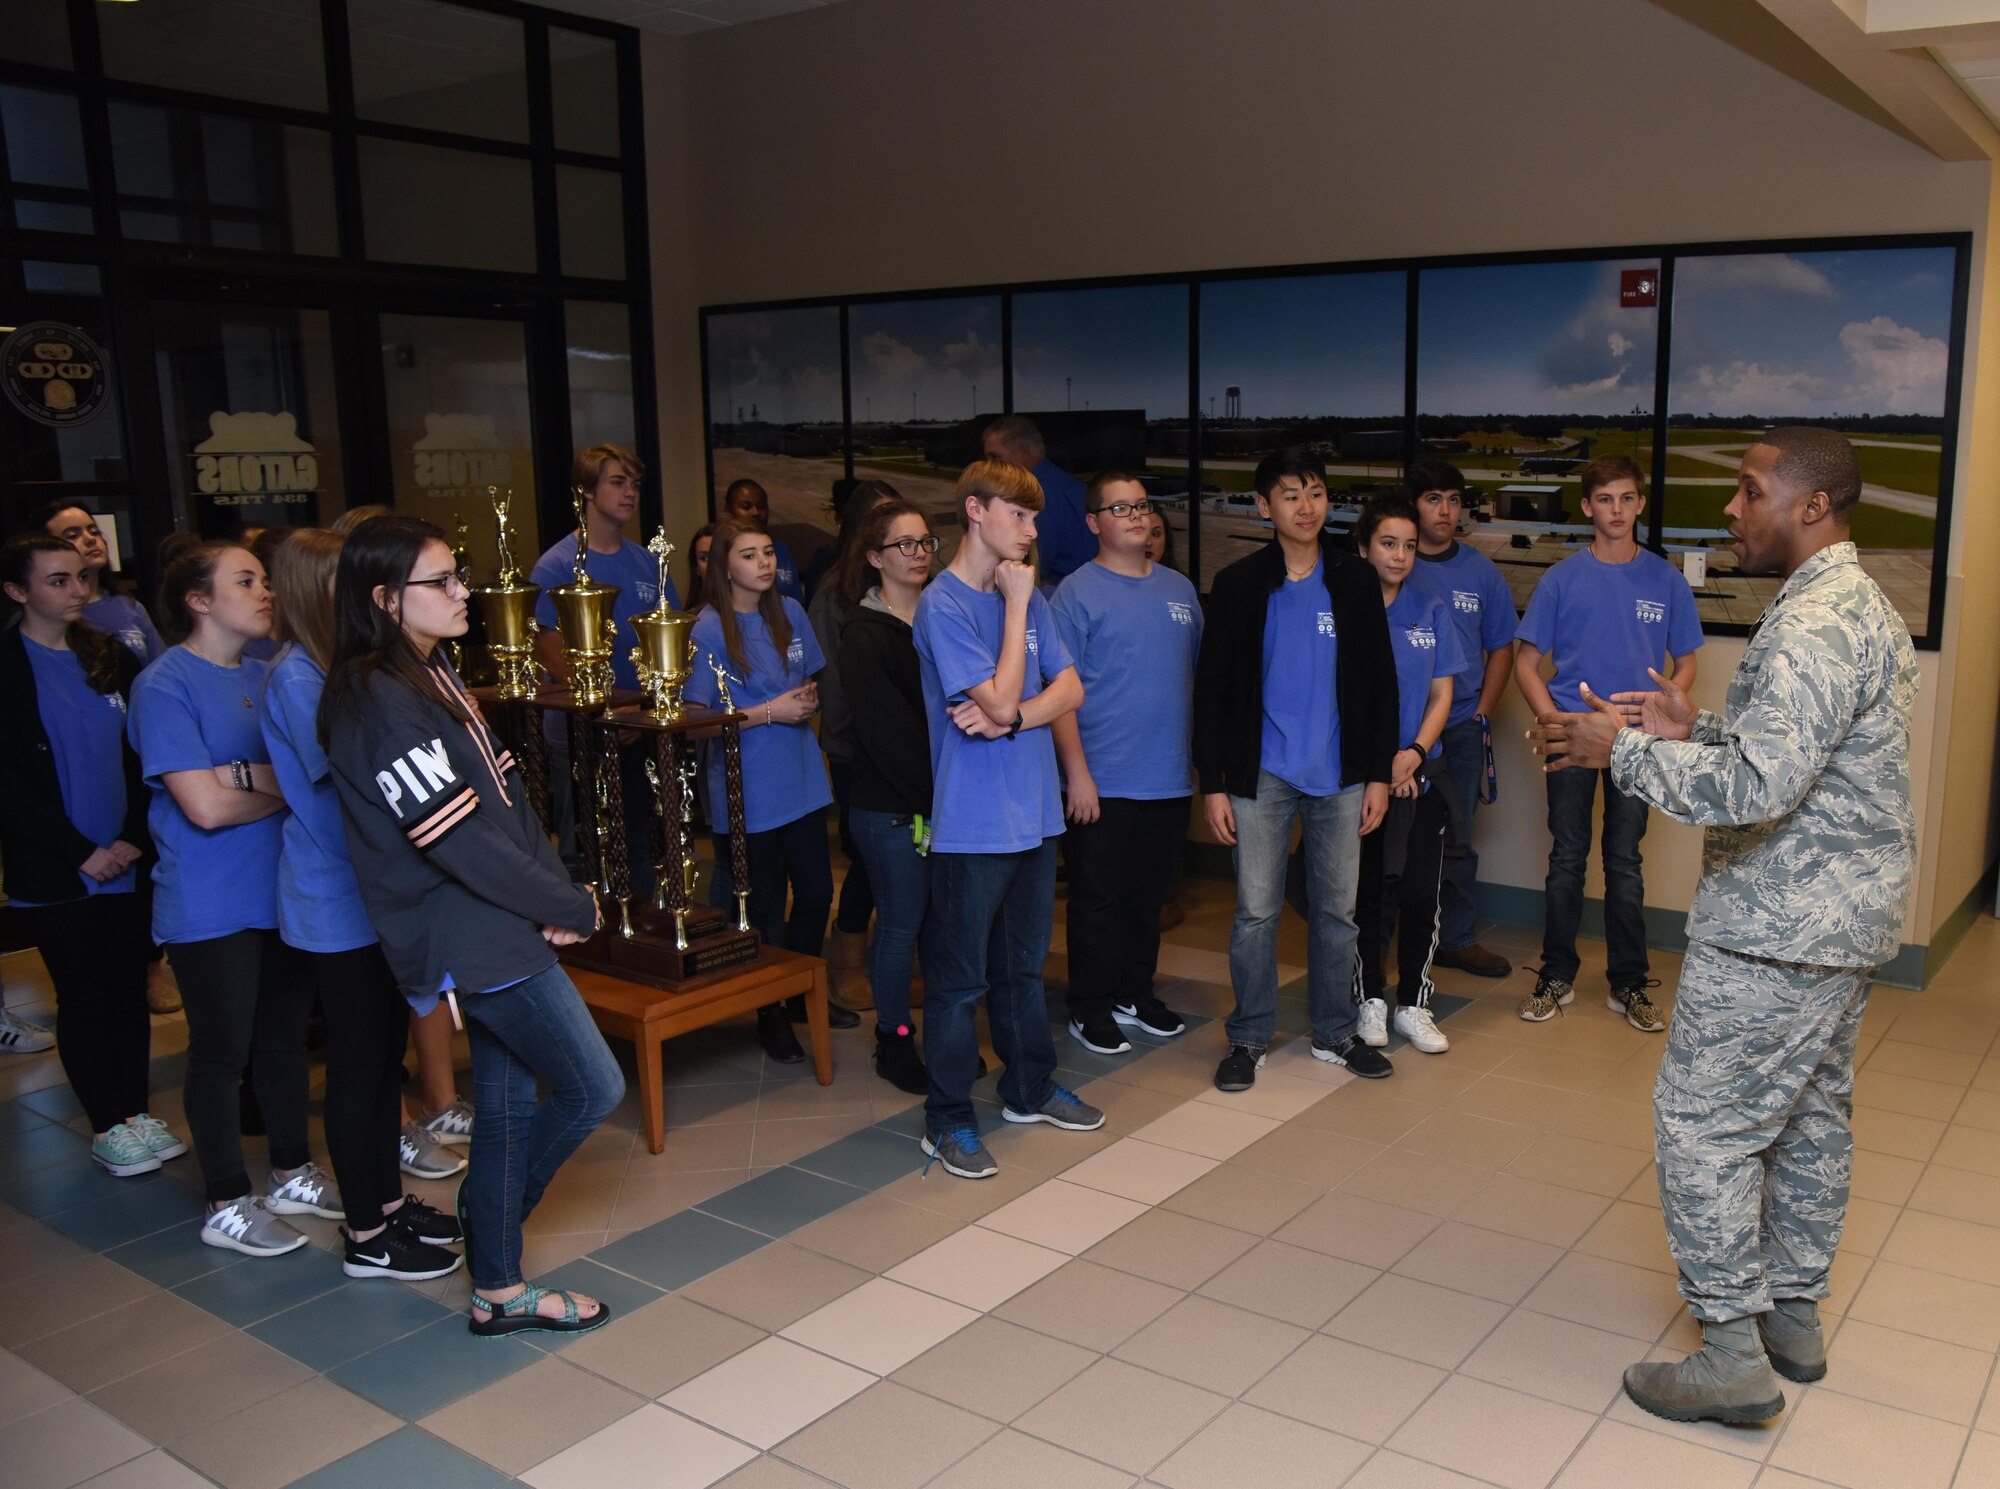 Capt. Edwin Pratt, 334th Training Squadron director of operations, welcomes local high school freshmen to Cody Hall during the Biloxi Chamber of Commerce Gulf Coast Junior Leadership Tour Jan. 24, 2017, on Keesler Air Force Base, Miss. The group’s objective is to produce students of outstanding character, while teaching them about community needs and what it takes to become a leader in today’s society. The visit included a 334th TRS air traffic control course overview, military training leader briefing and a dorm tour. (U.S. Air Force photo by Kemberly Groue)